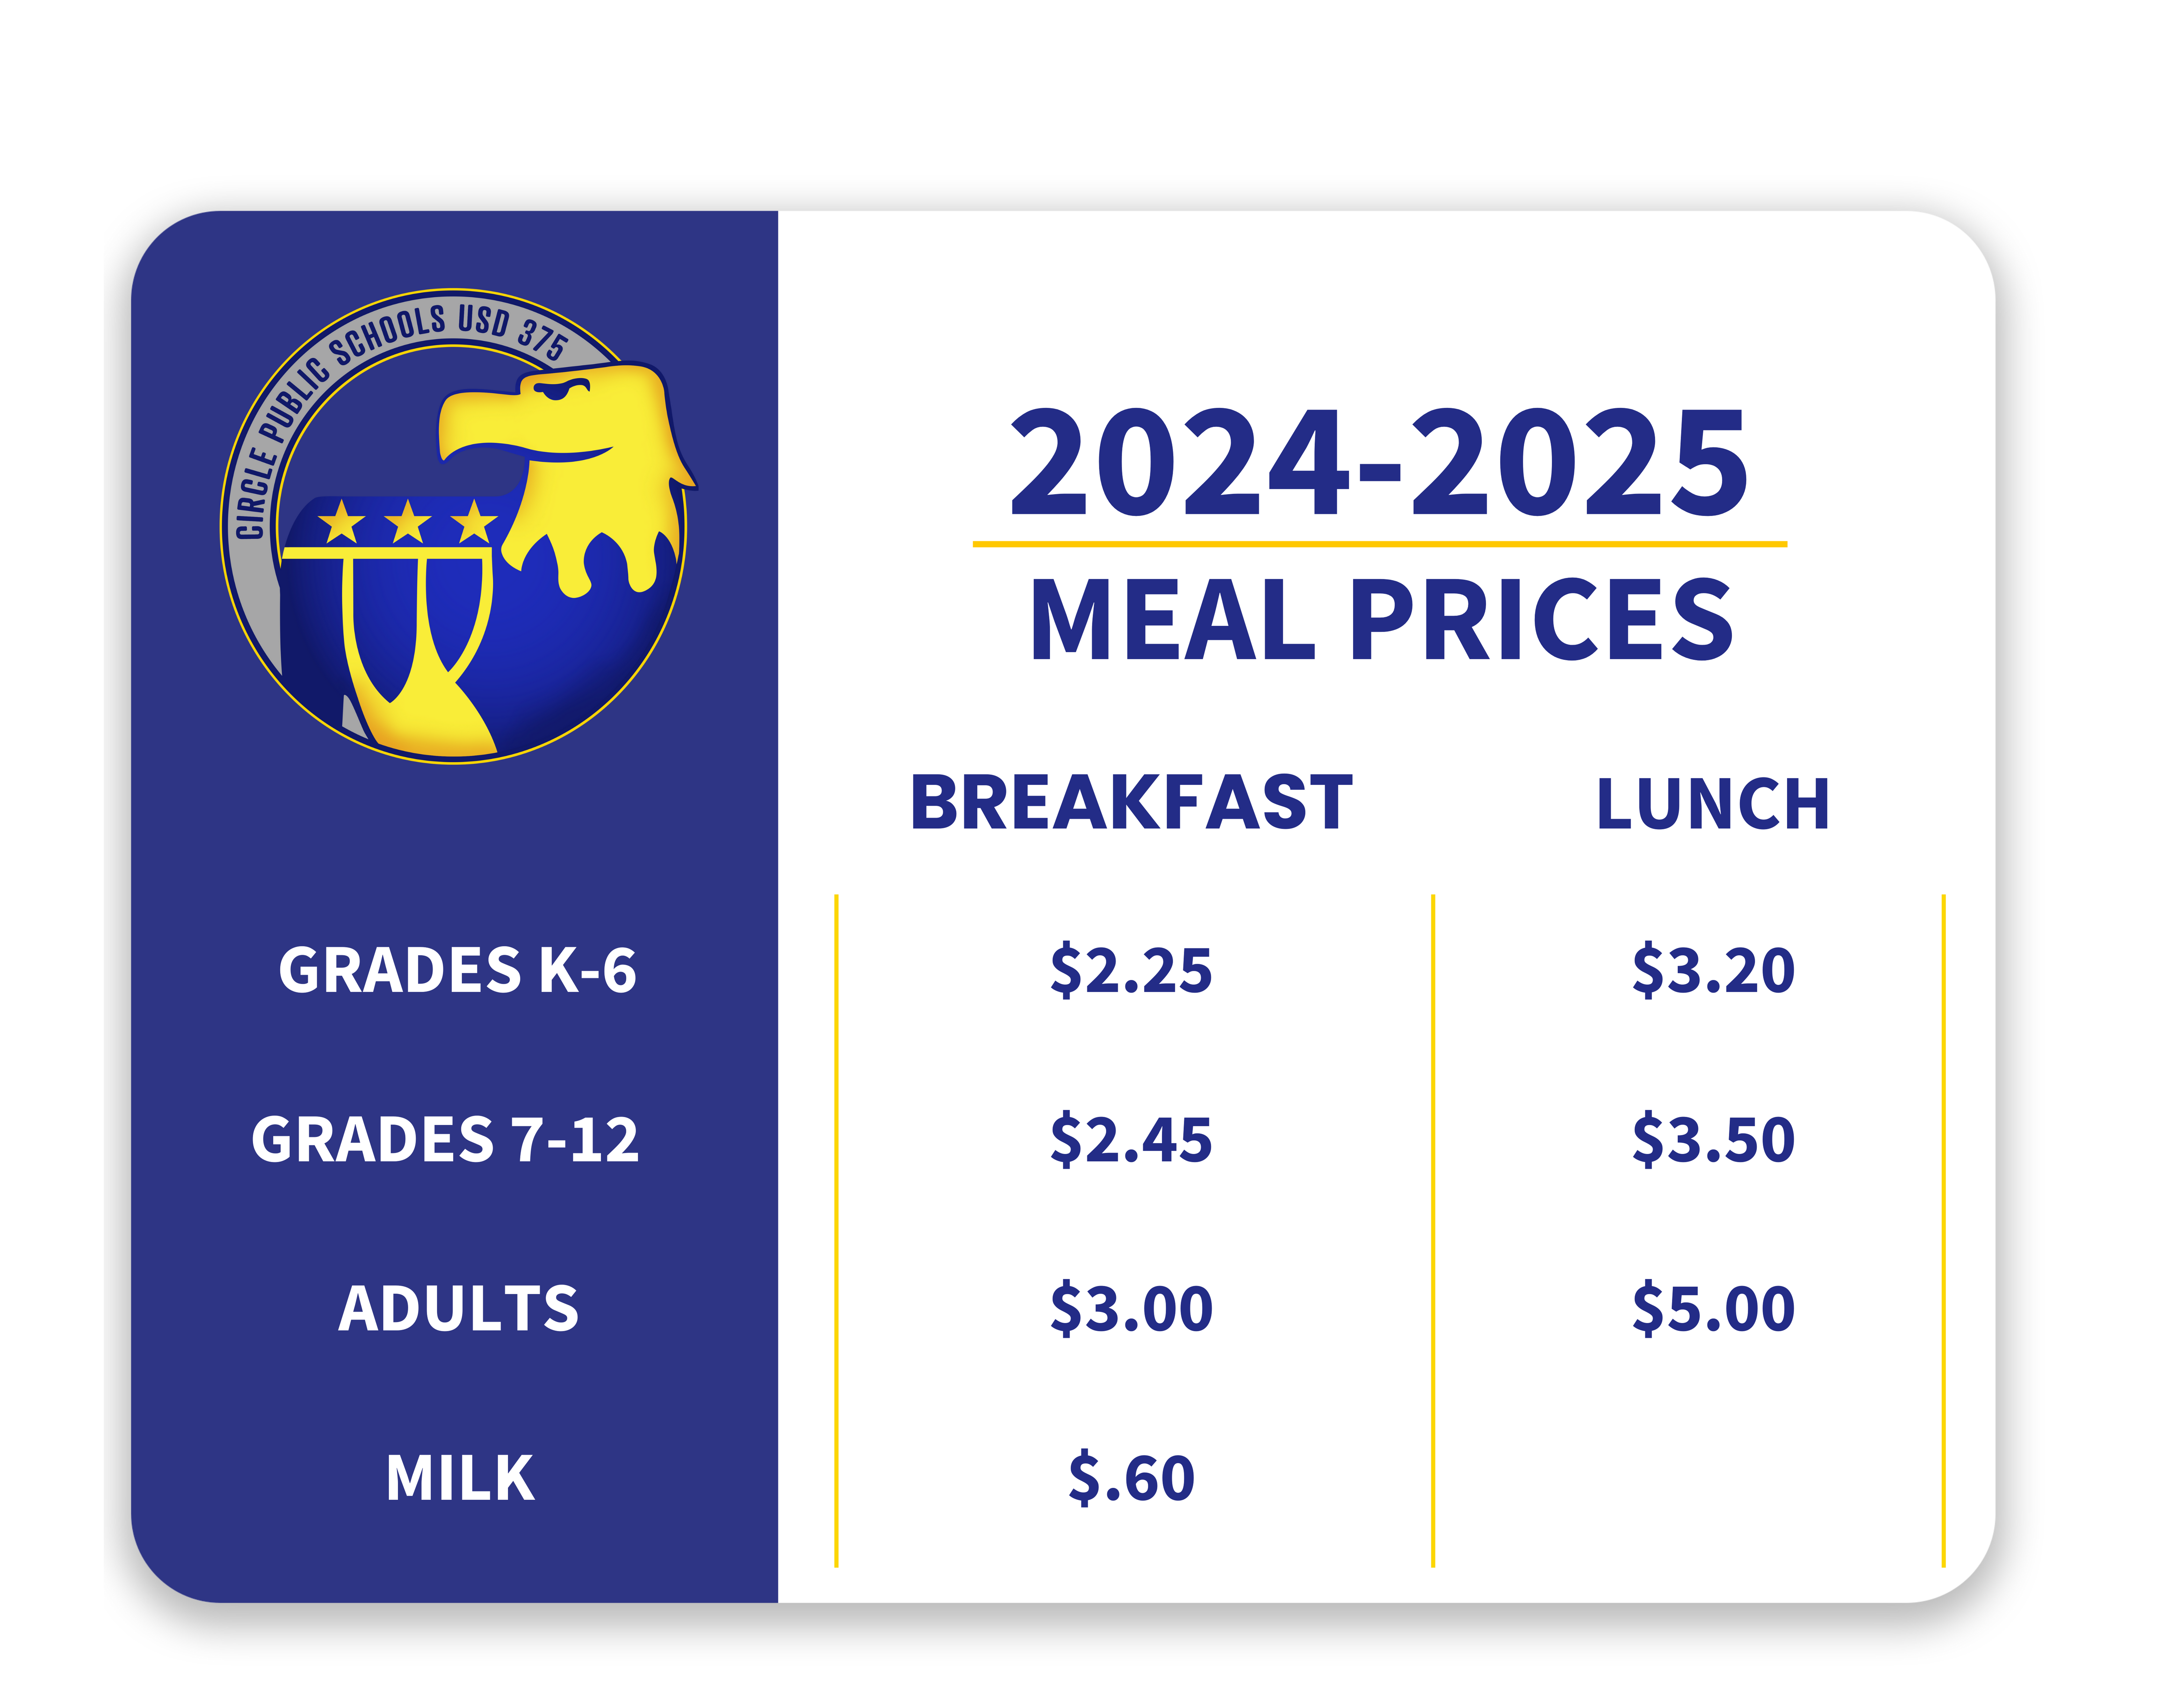 24-25 Meal Prices